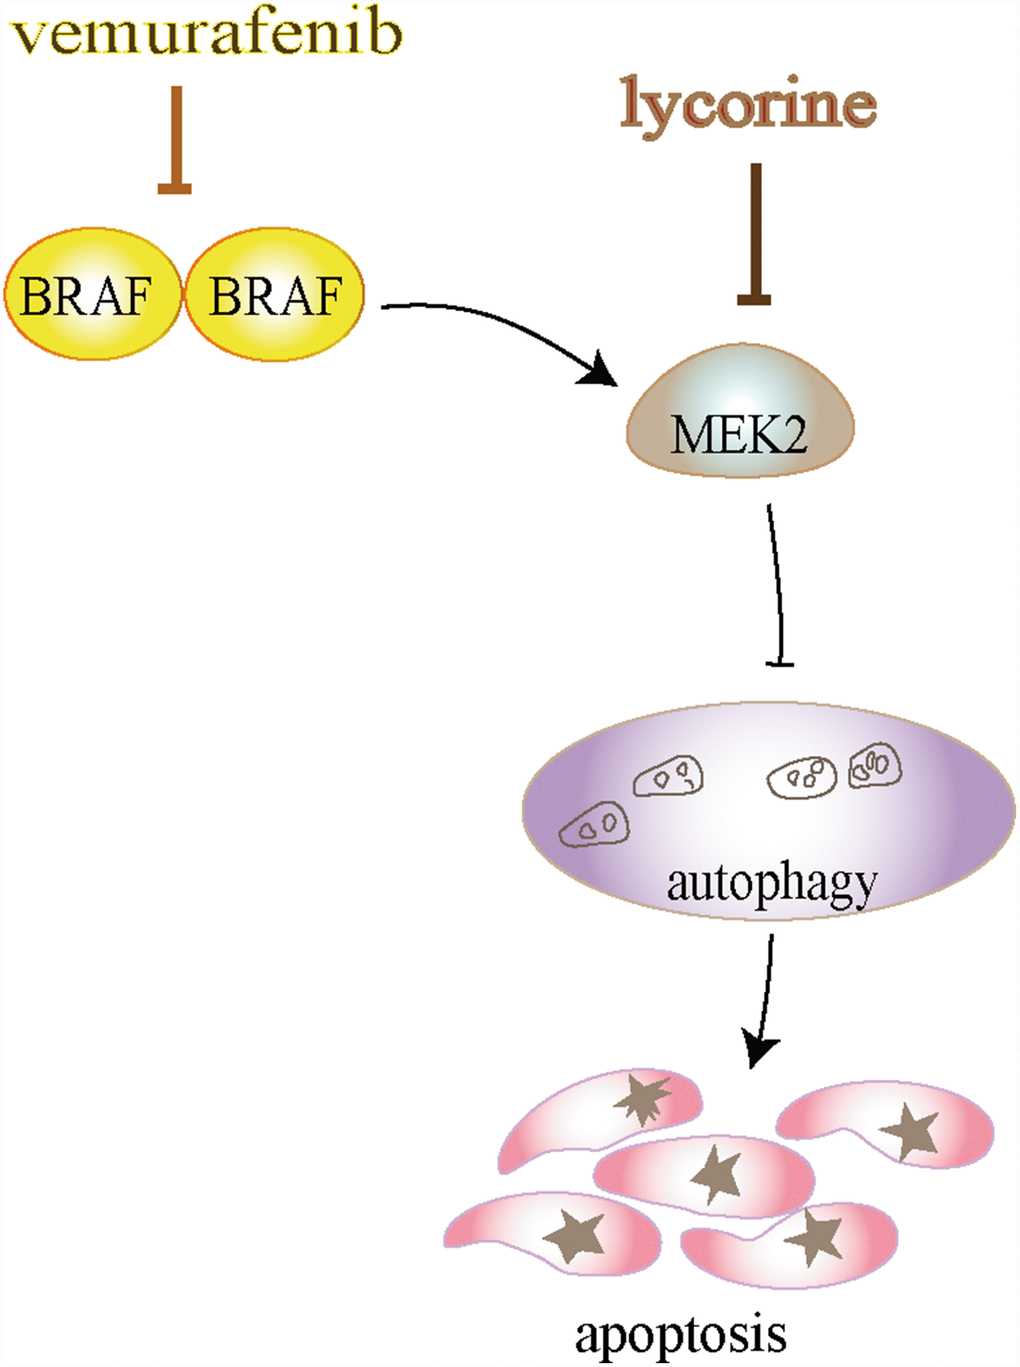 Schematic diagram illustrates that lycorine induces autophagy-associated apoptosis by targeting mitogen-activated protein kinase kinase (MEK2) and enhances the anti-cancer effect of the BRAF inhibitor vemurafenib.